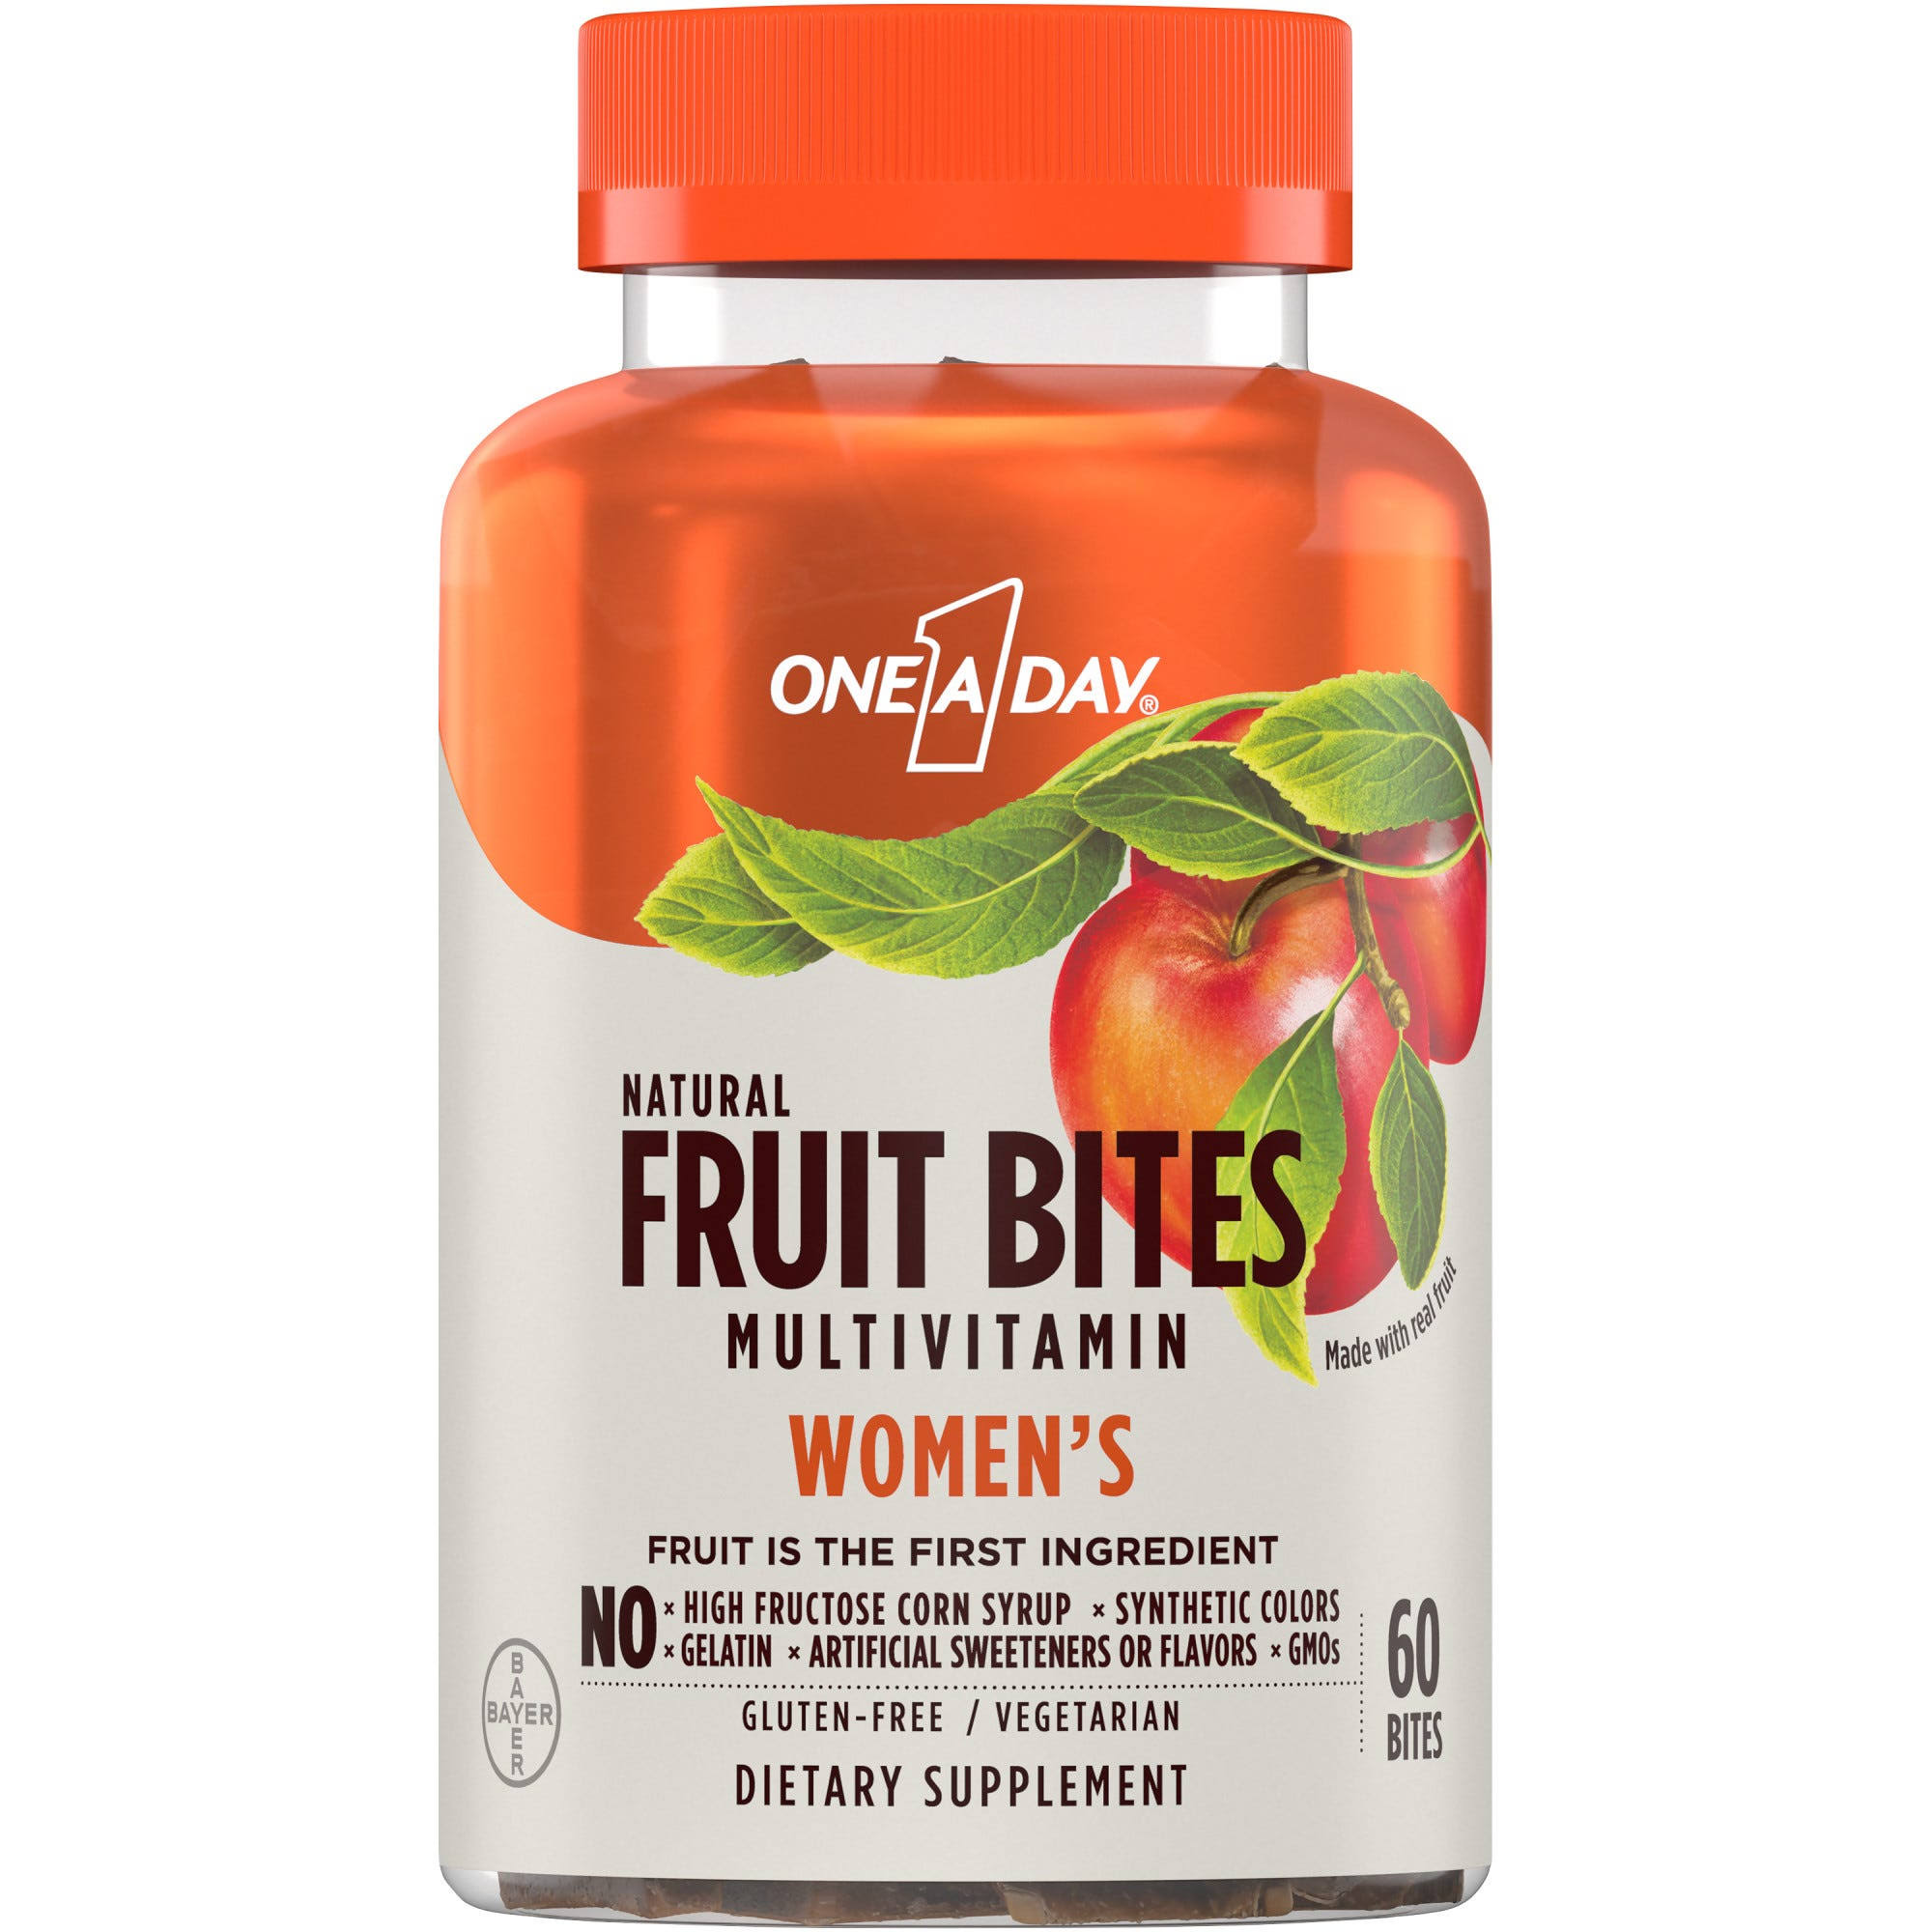 One A Day Women's Multivitamin Natural Fruit Bites, 60 CT